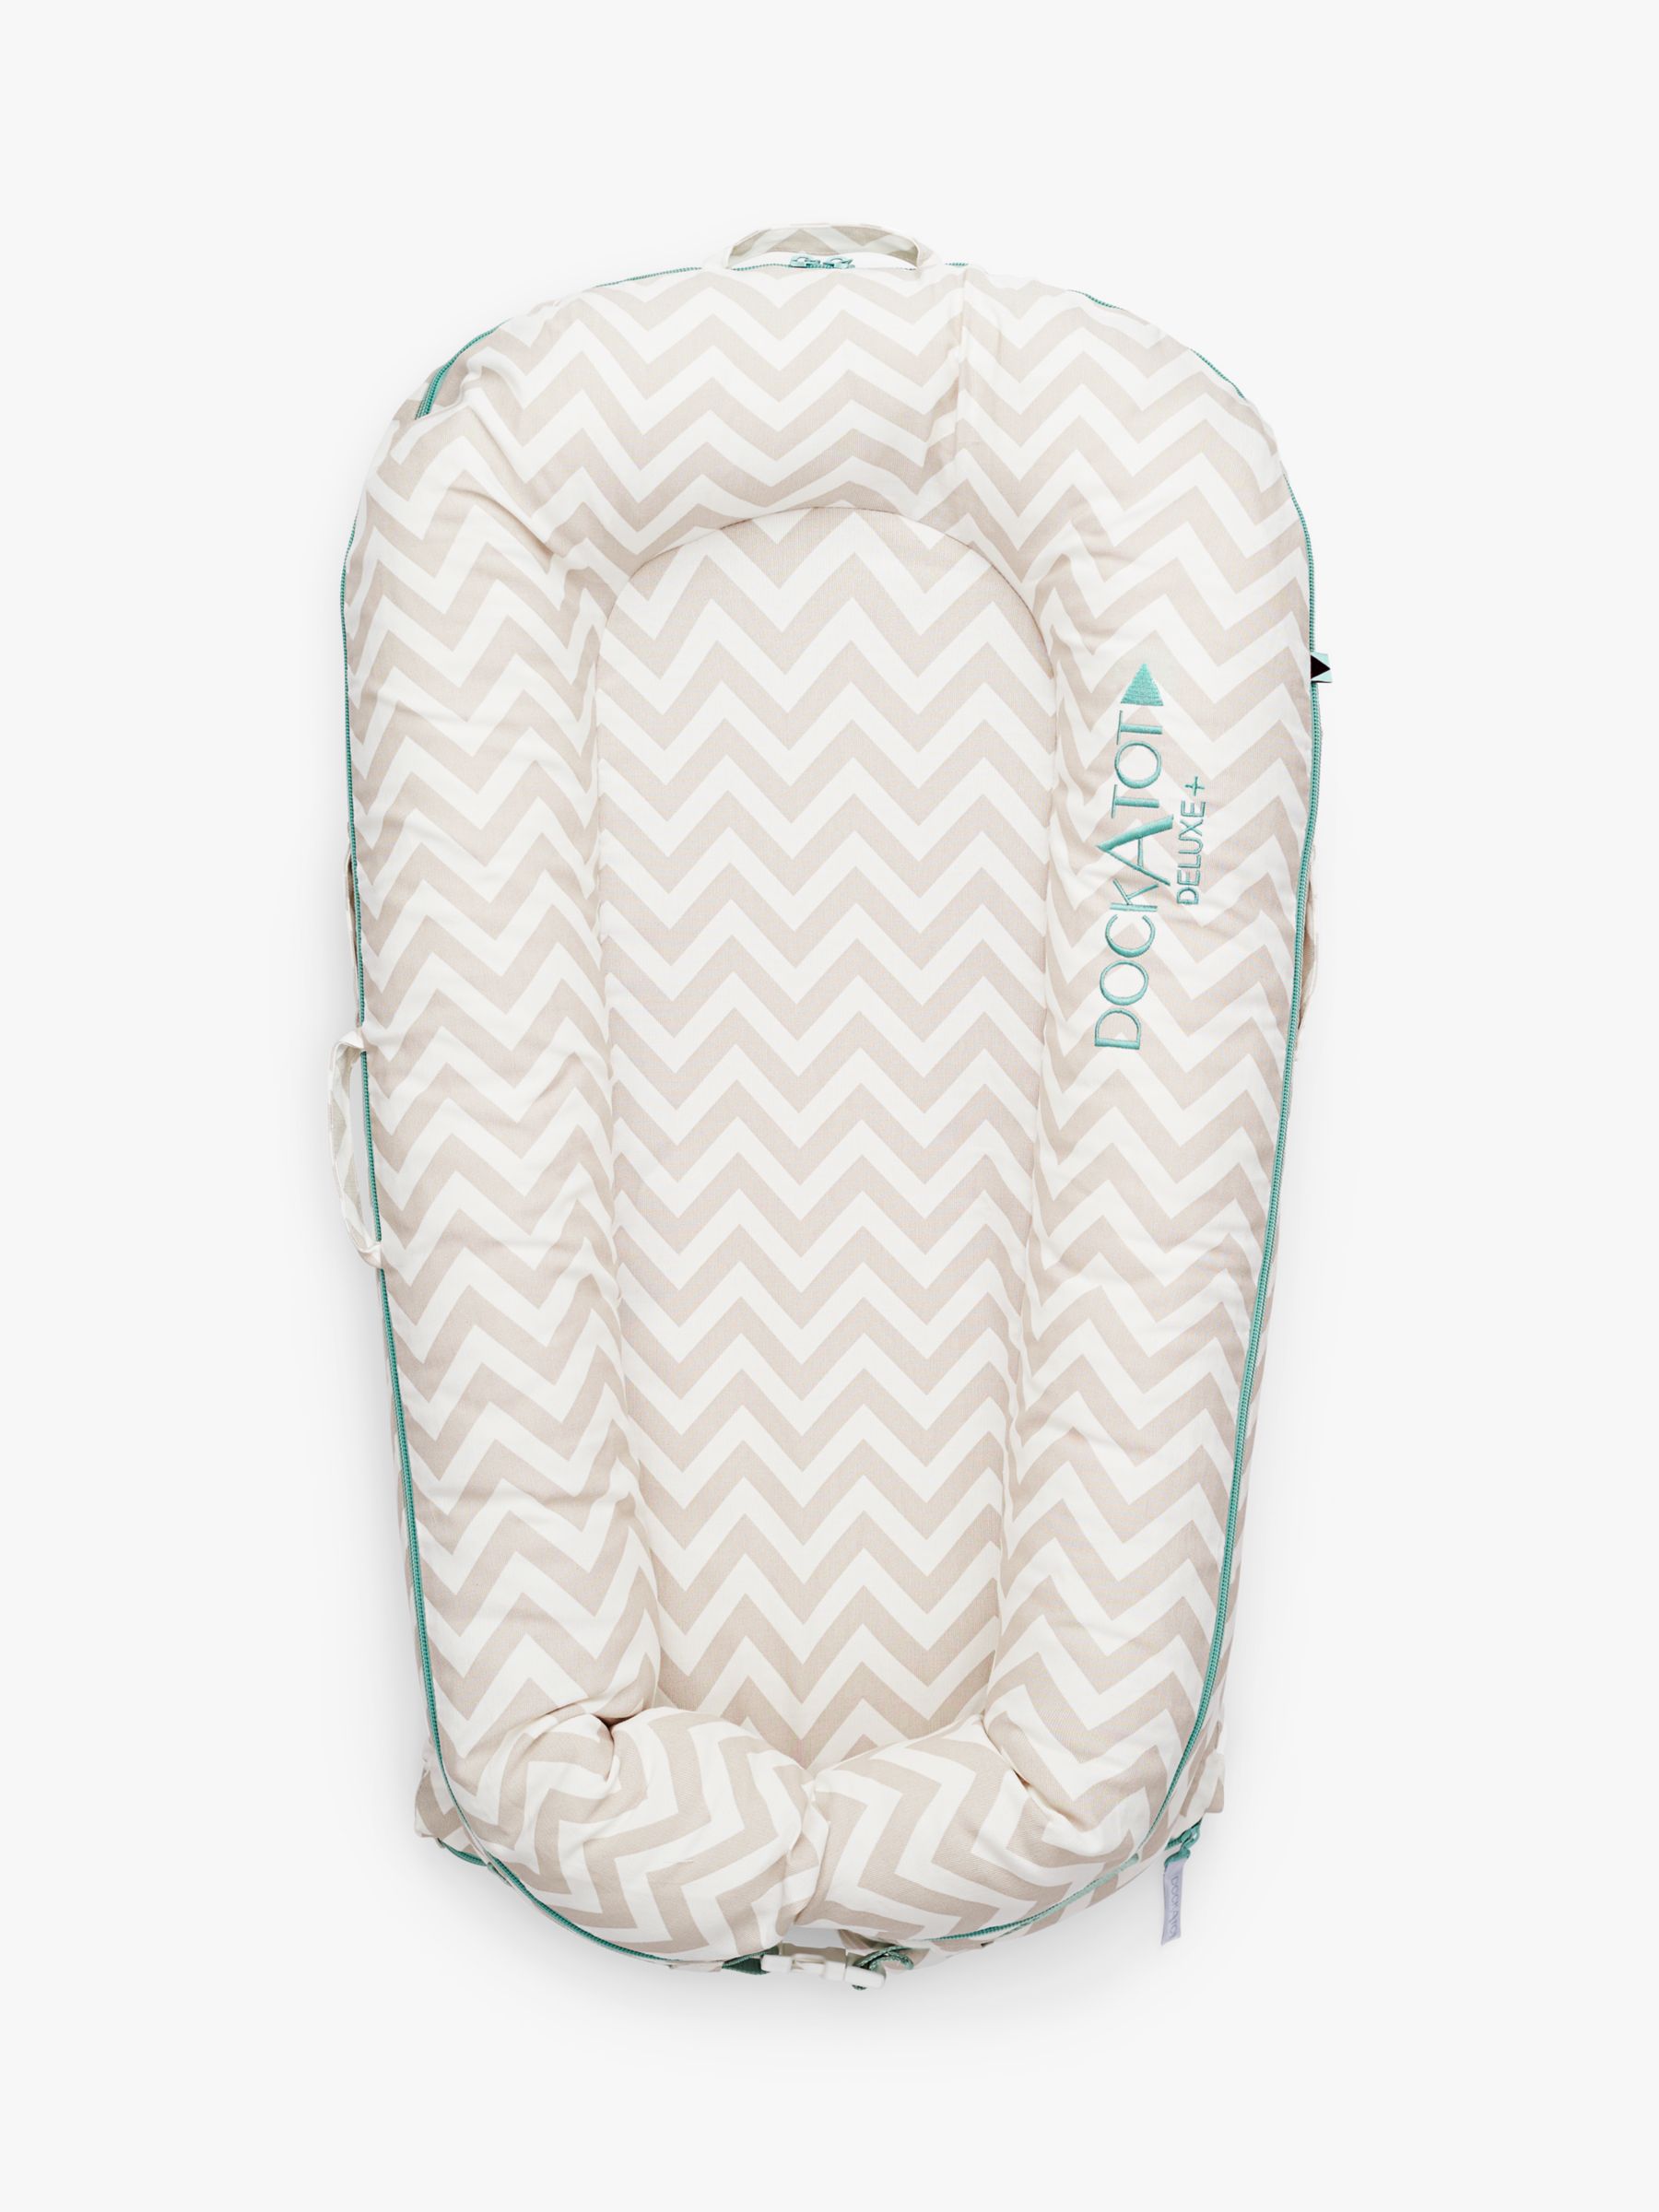 DockATot Deluxe+ Silver Lining Baby Pod, 0-8 months